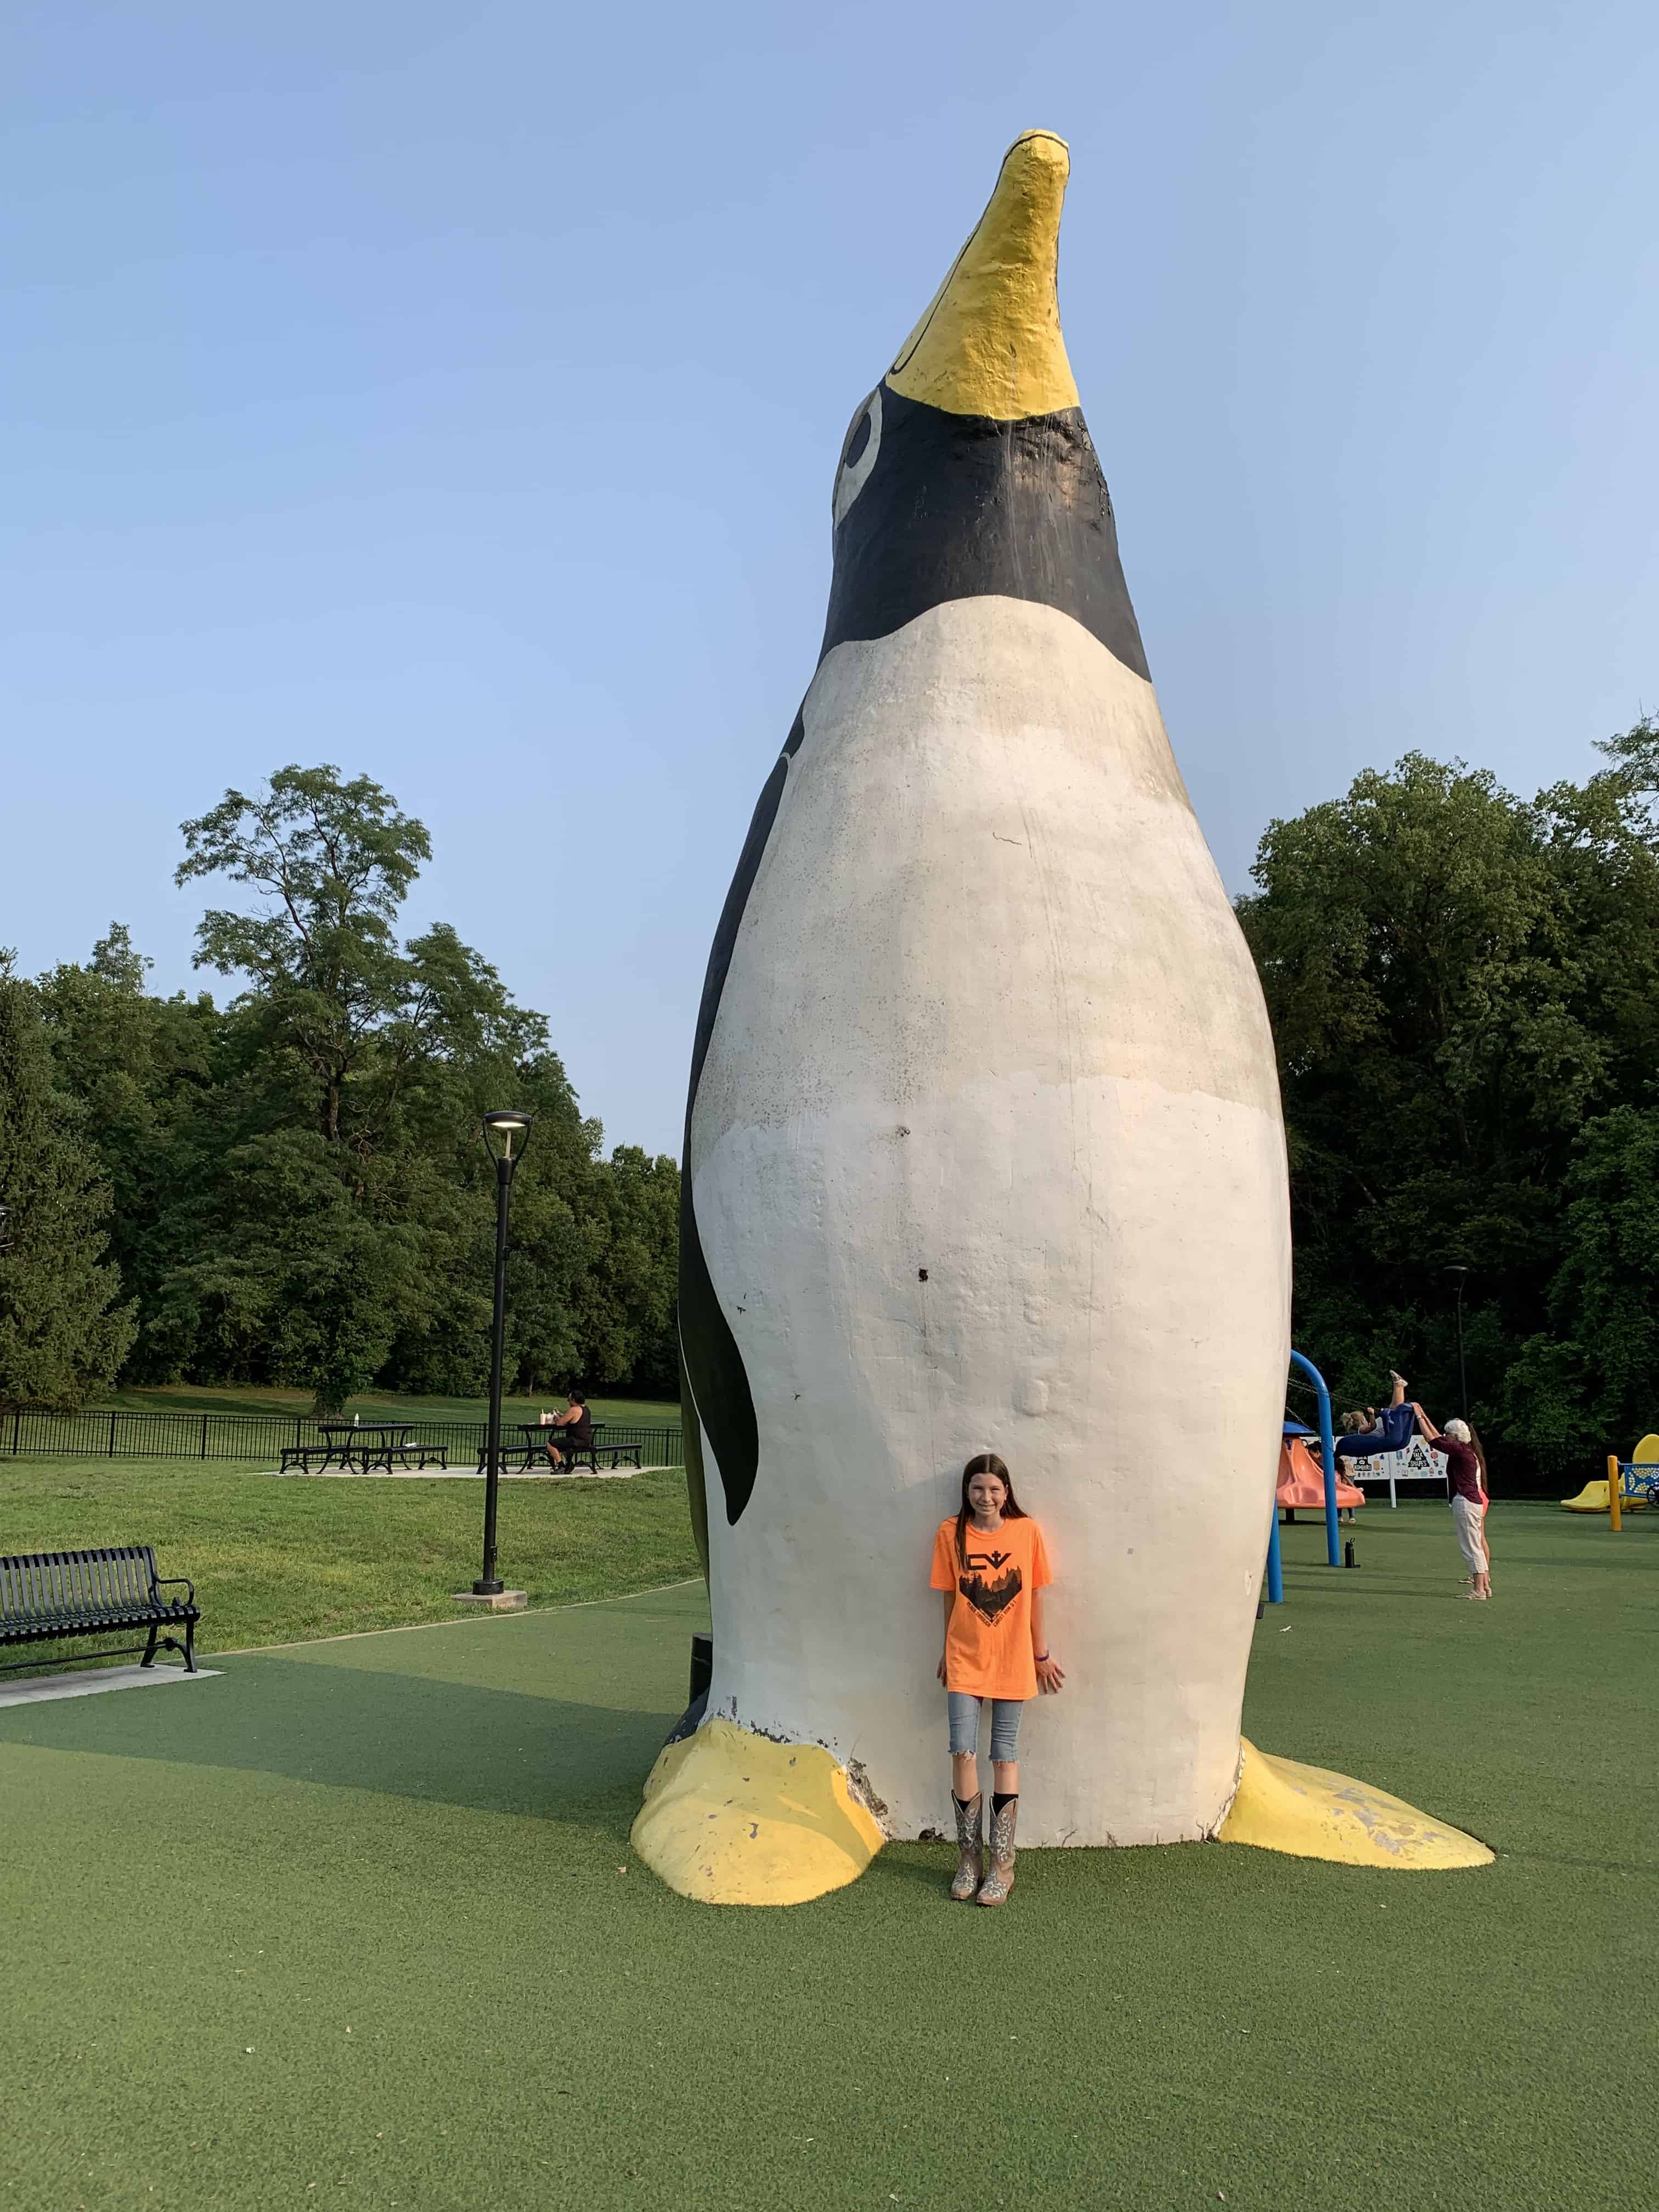 Girl in front of penguin at the Penguin Park in Kansas City, MO